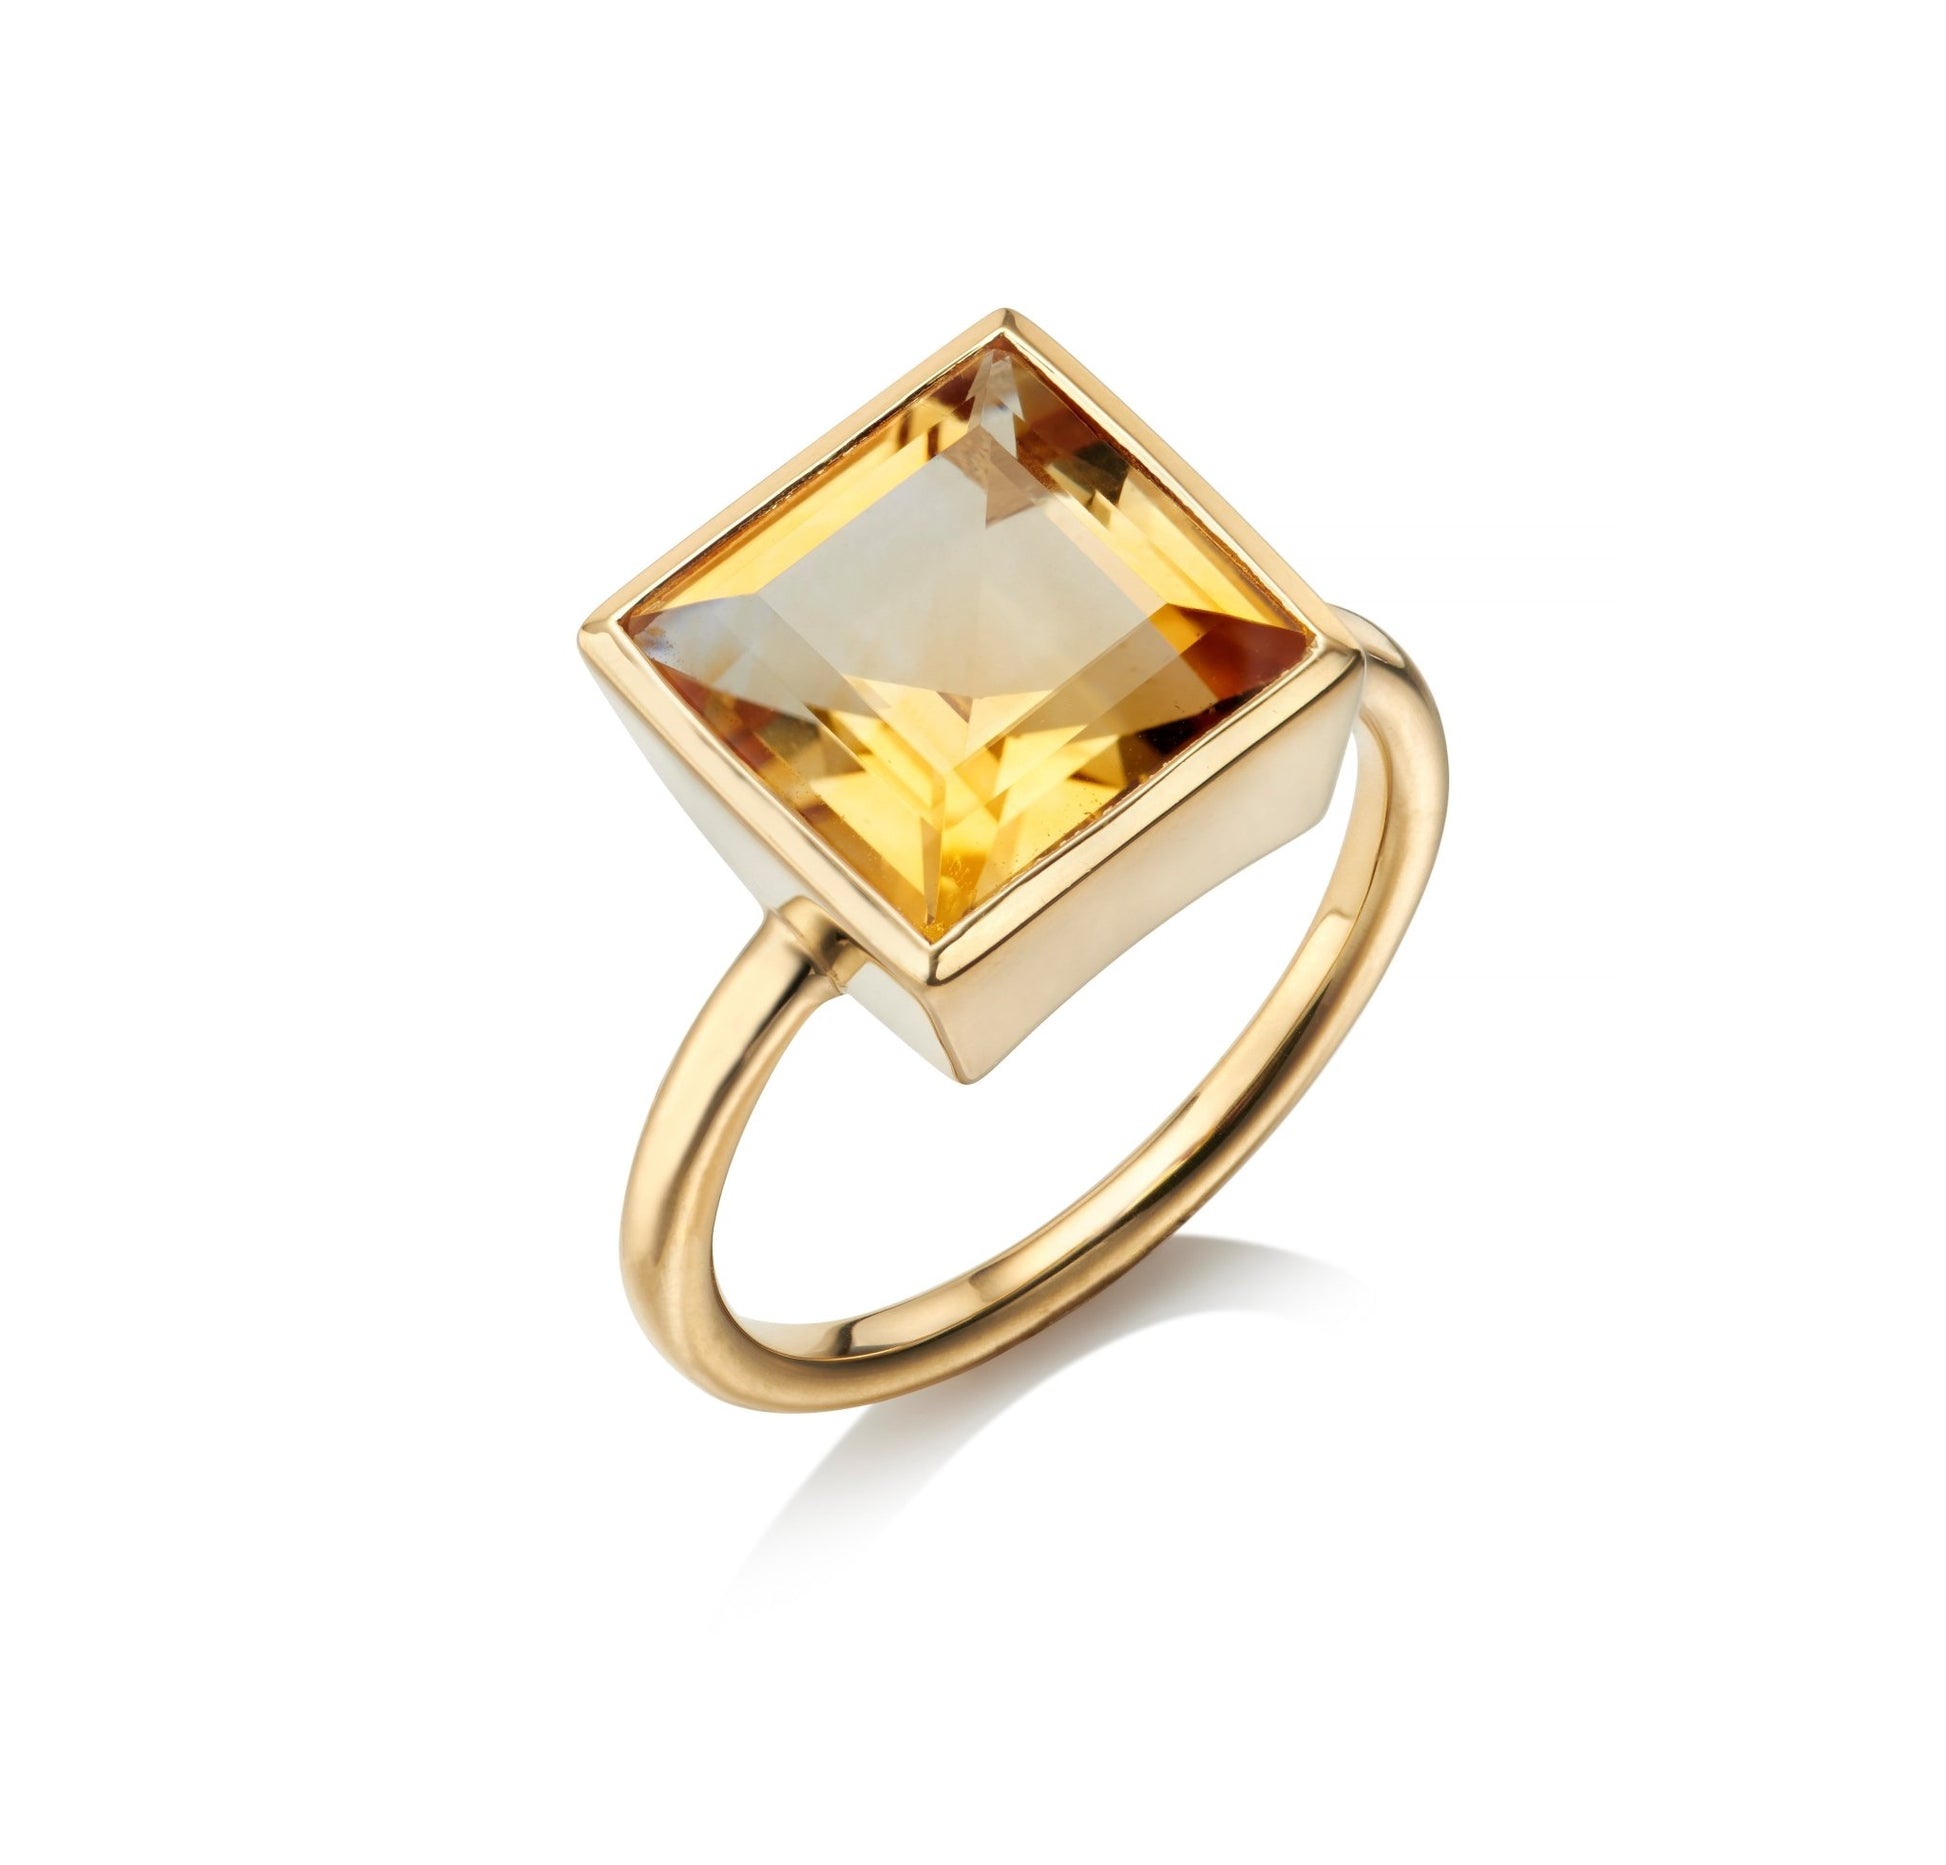 9CT YELLOW GOLD CITRINE COCKTAIL RING - Fool's Gold Jewellery